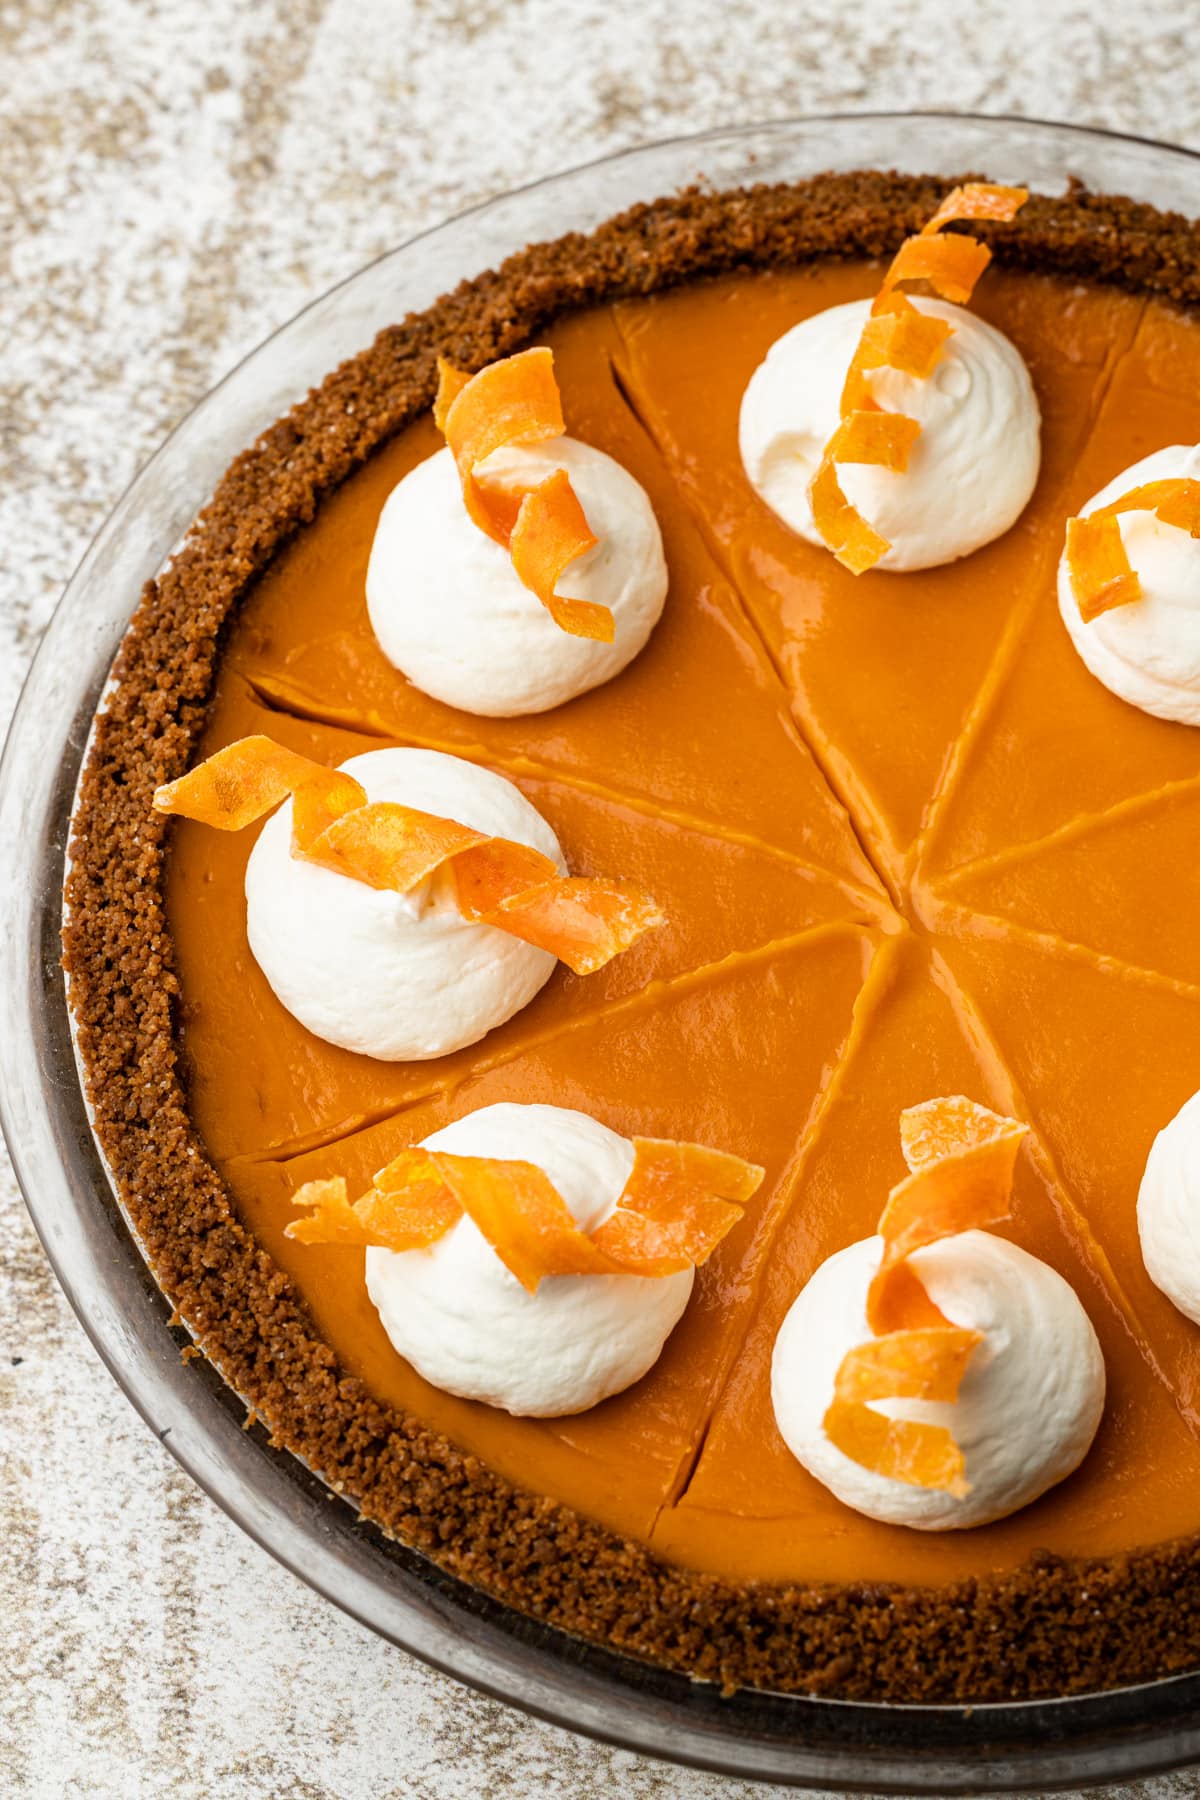 A carrot pie with honey in a biscoff cookie crust.